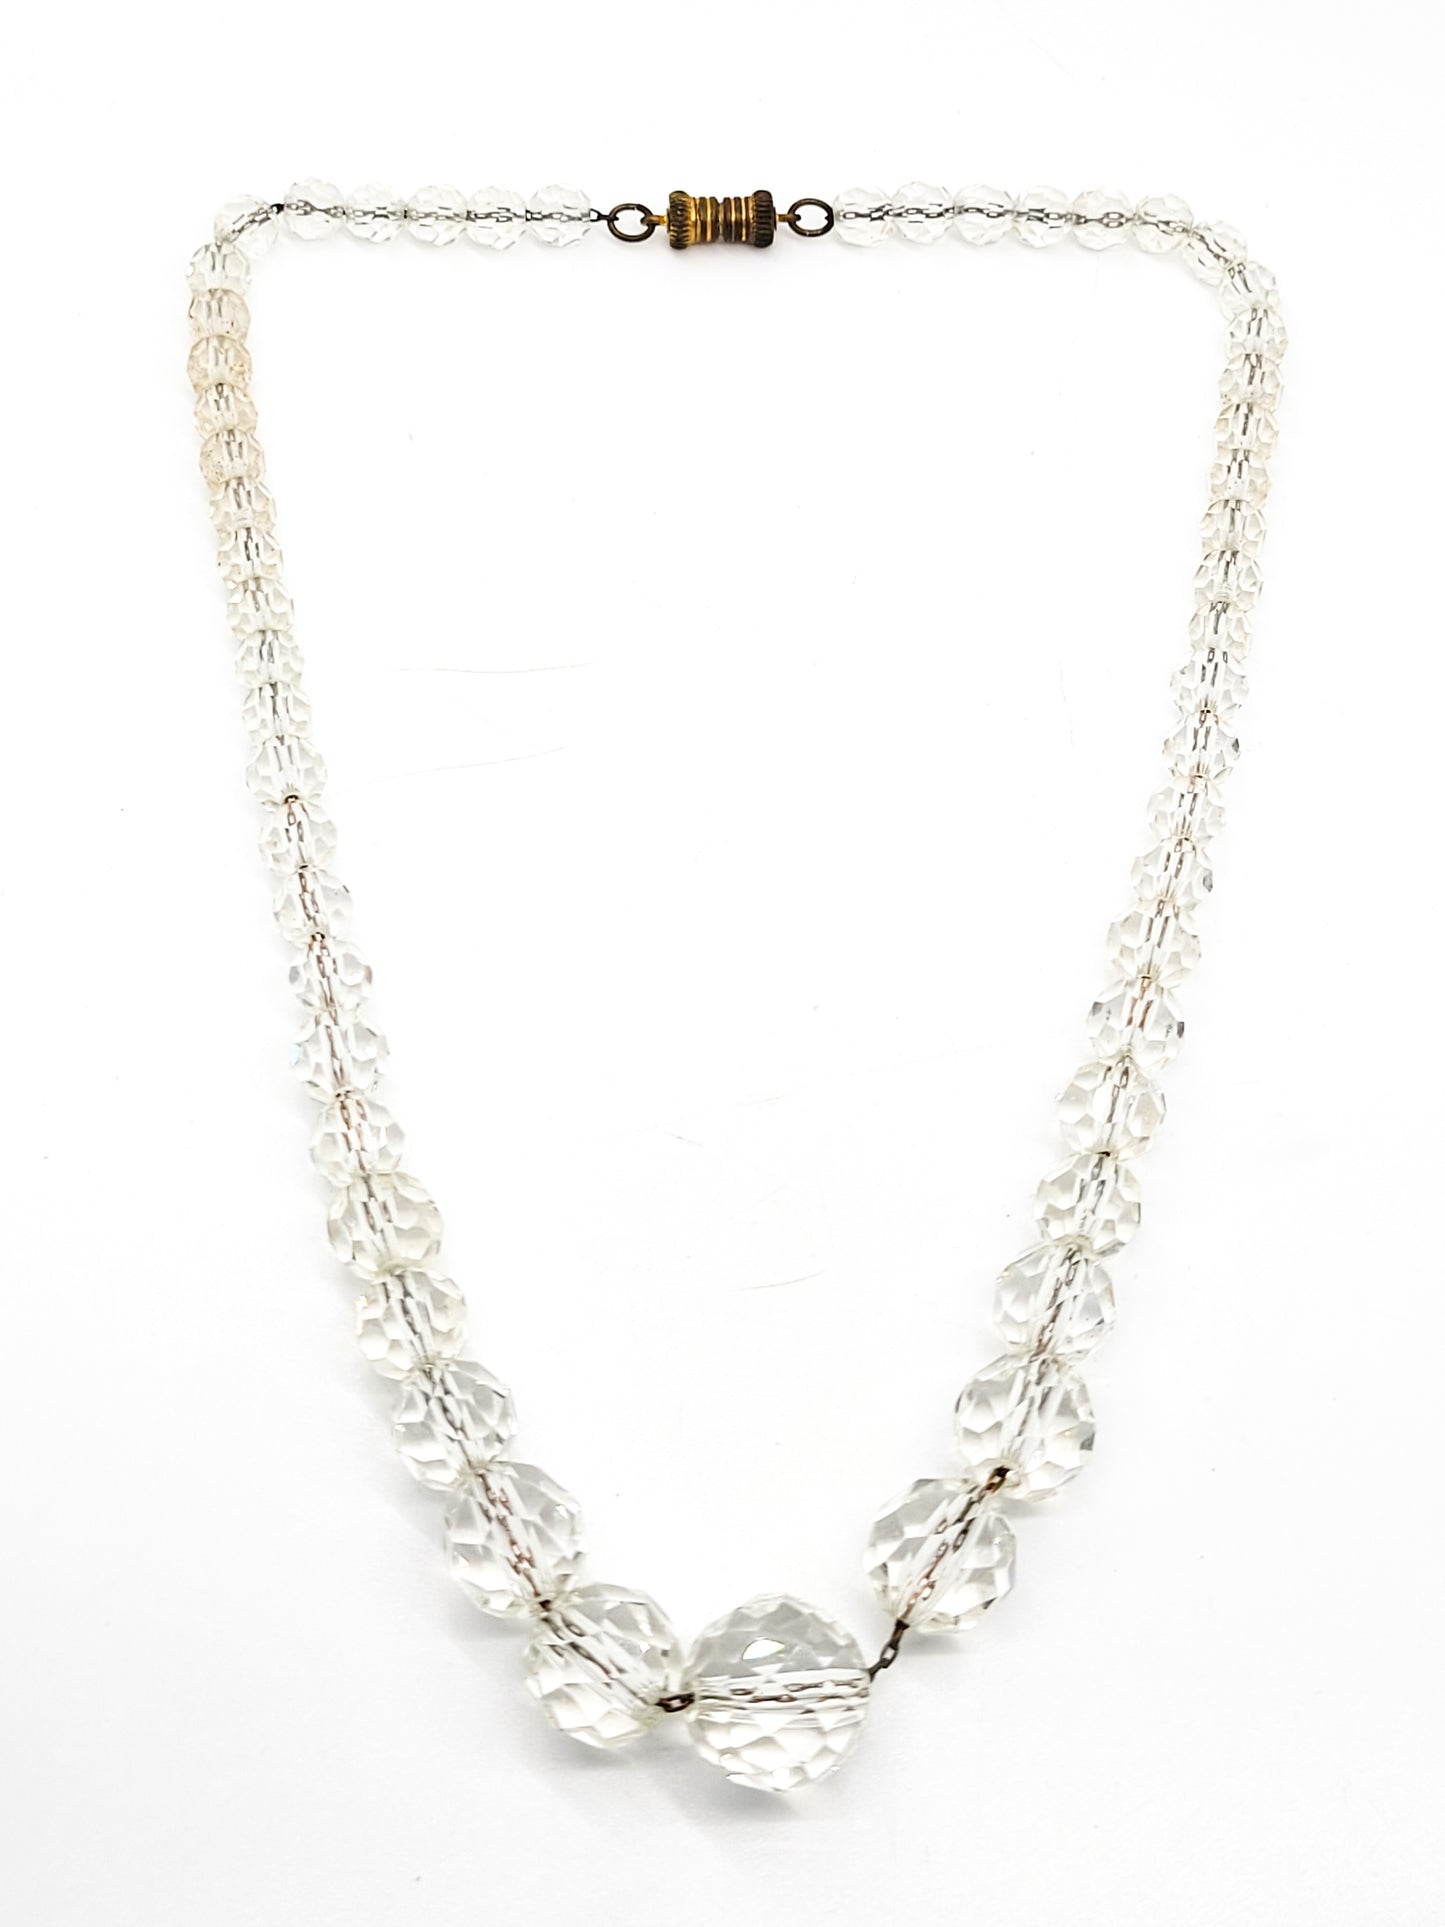 Art Deco faceted clear lead crystal vintage beaded necklace on chain with barrel clasp